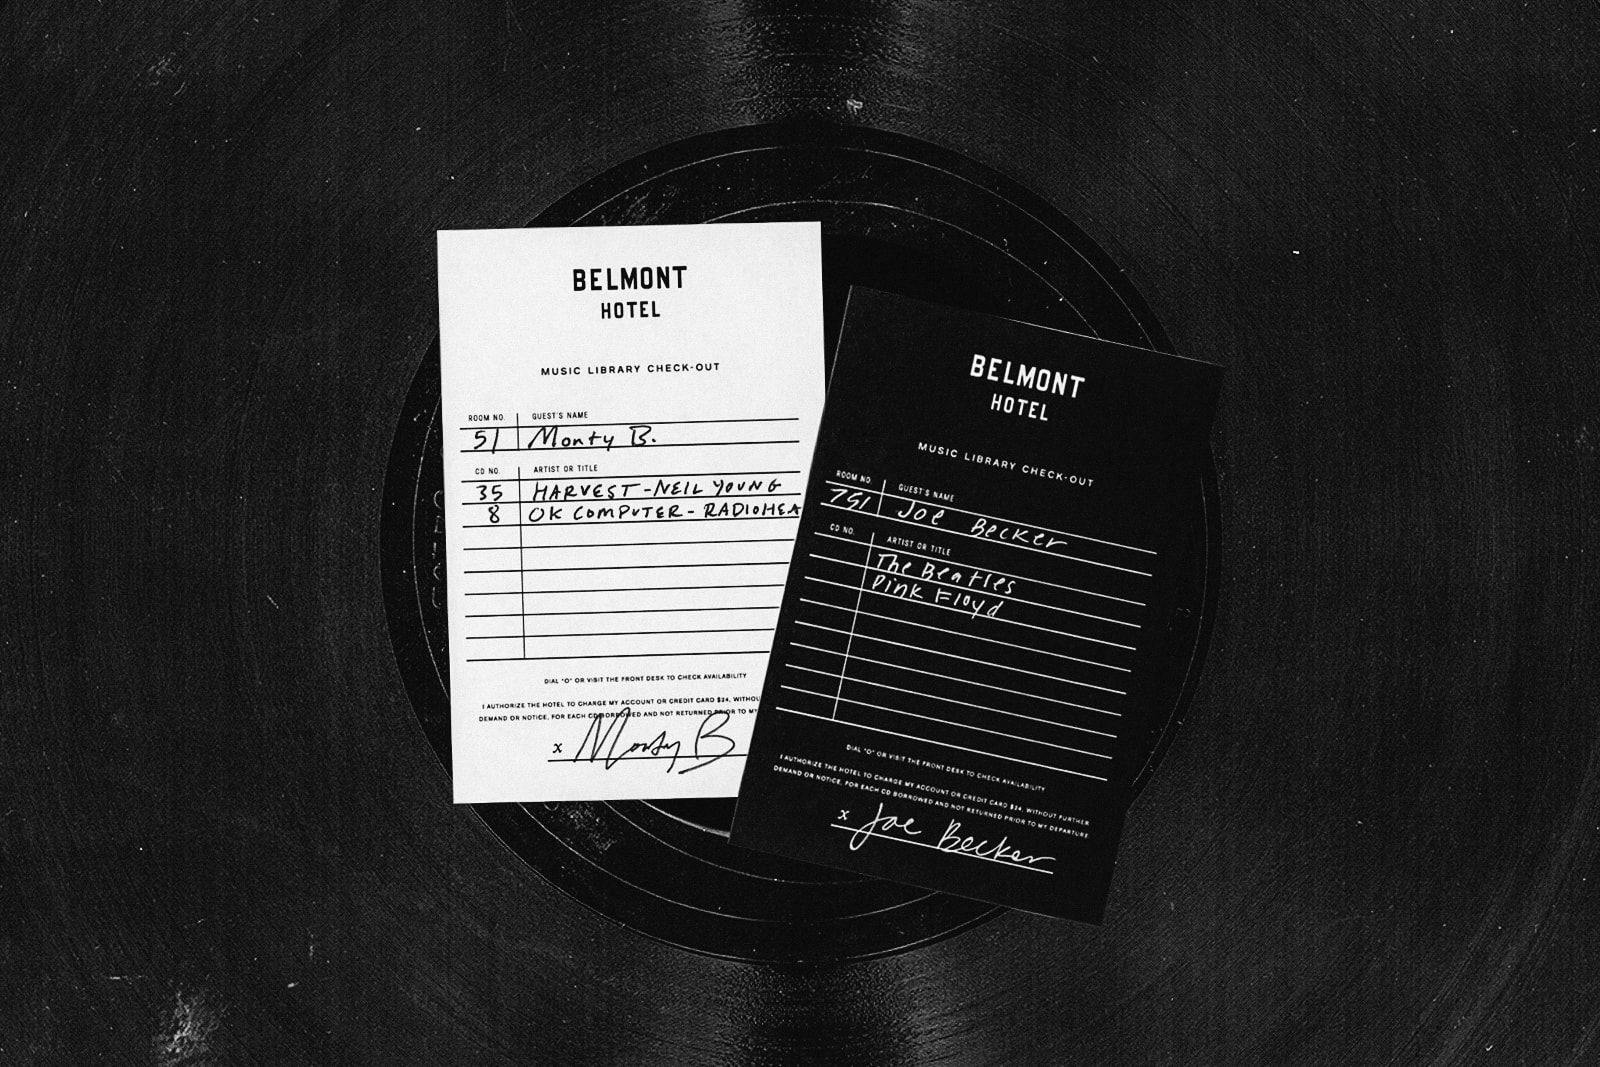 Music library check out forms for Belmont Hotel